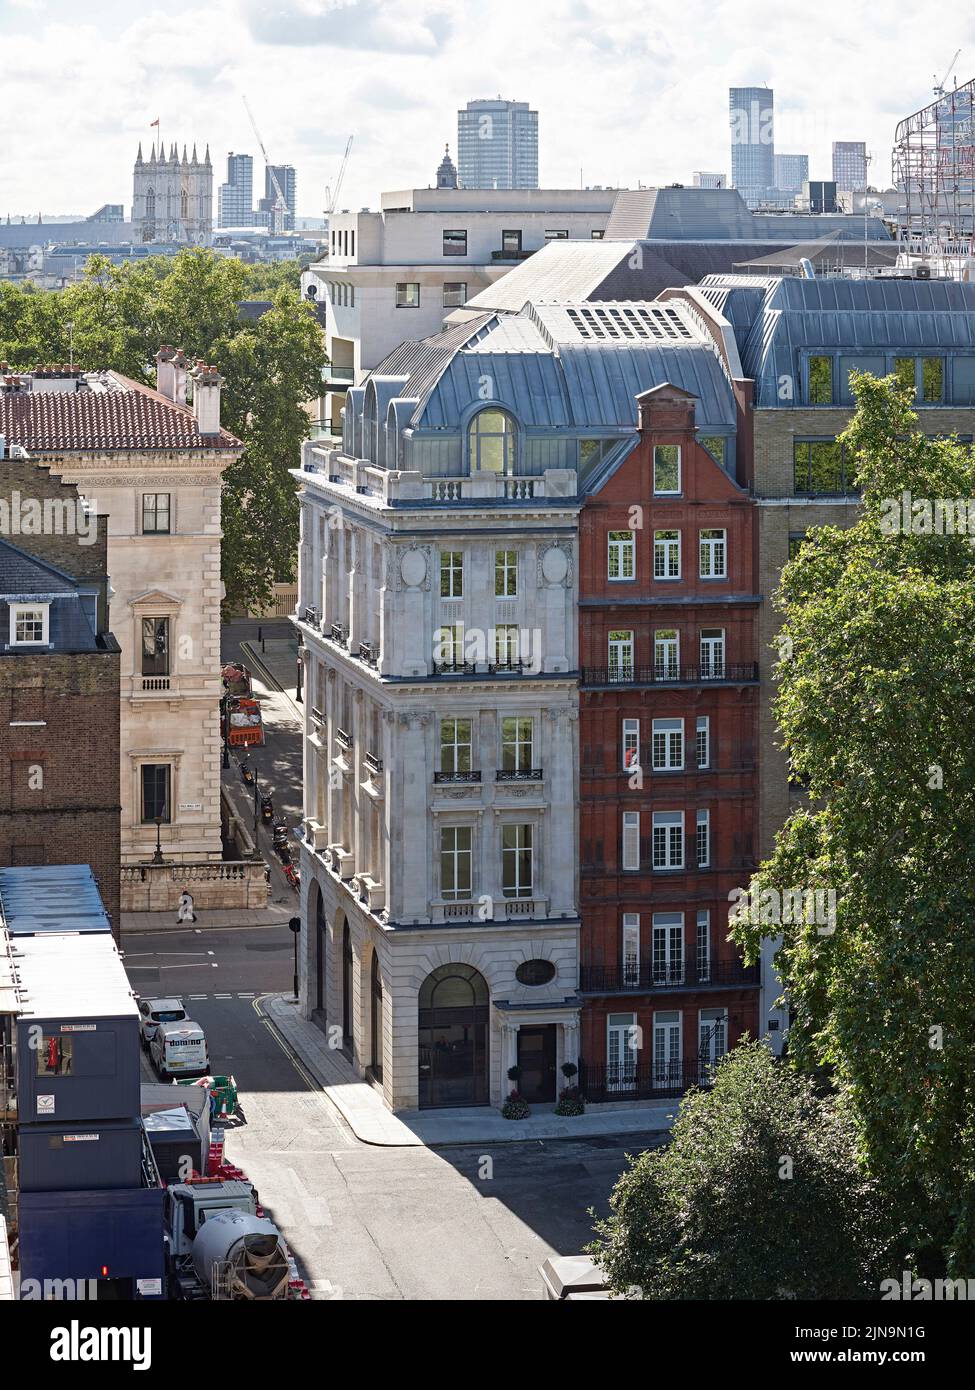 Elevated contextual view of historic facades on St James' Square. 30 St James' Square, London, United Kingdom. Architect: Eric Parry Architects Ltd, 2 Stock Photo